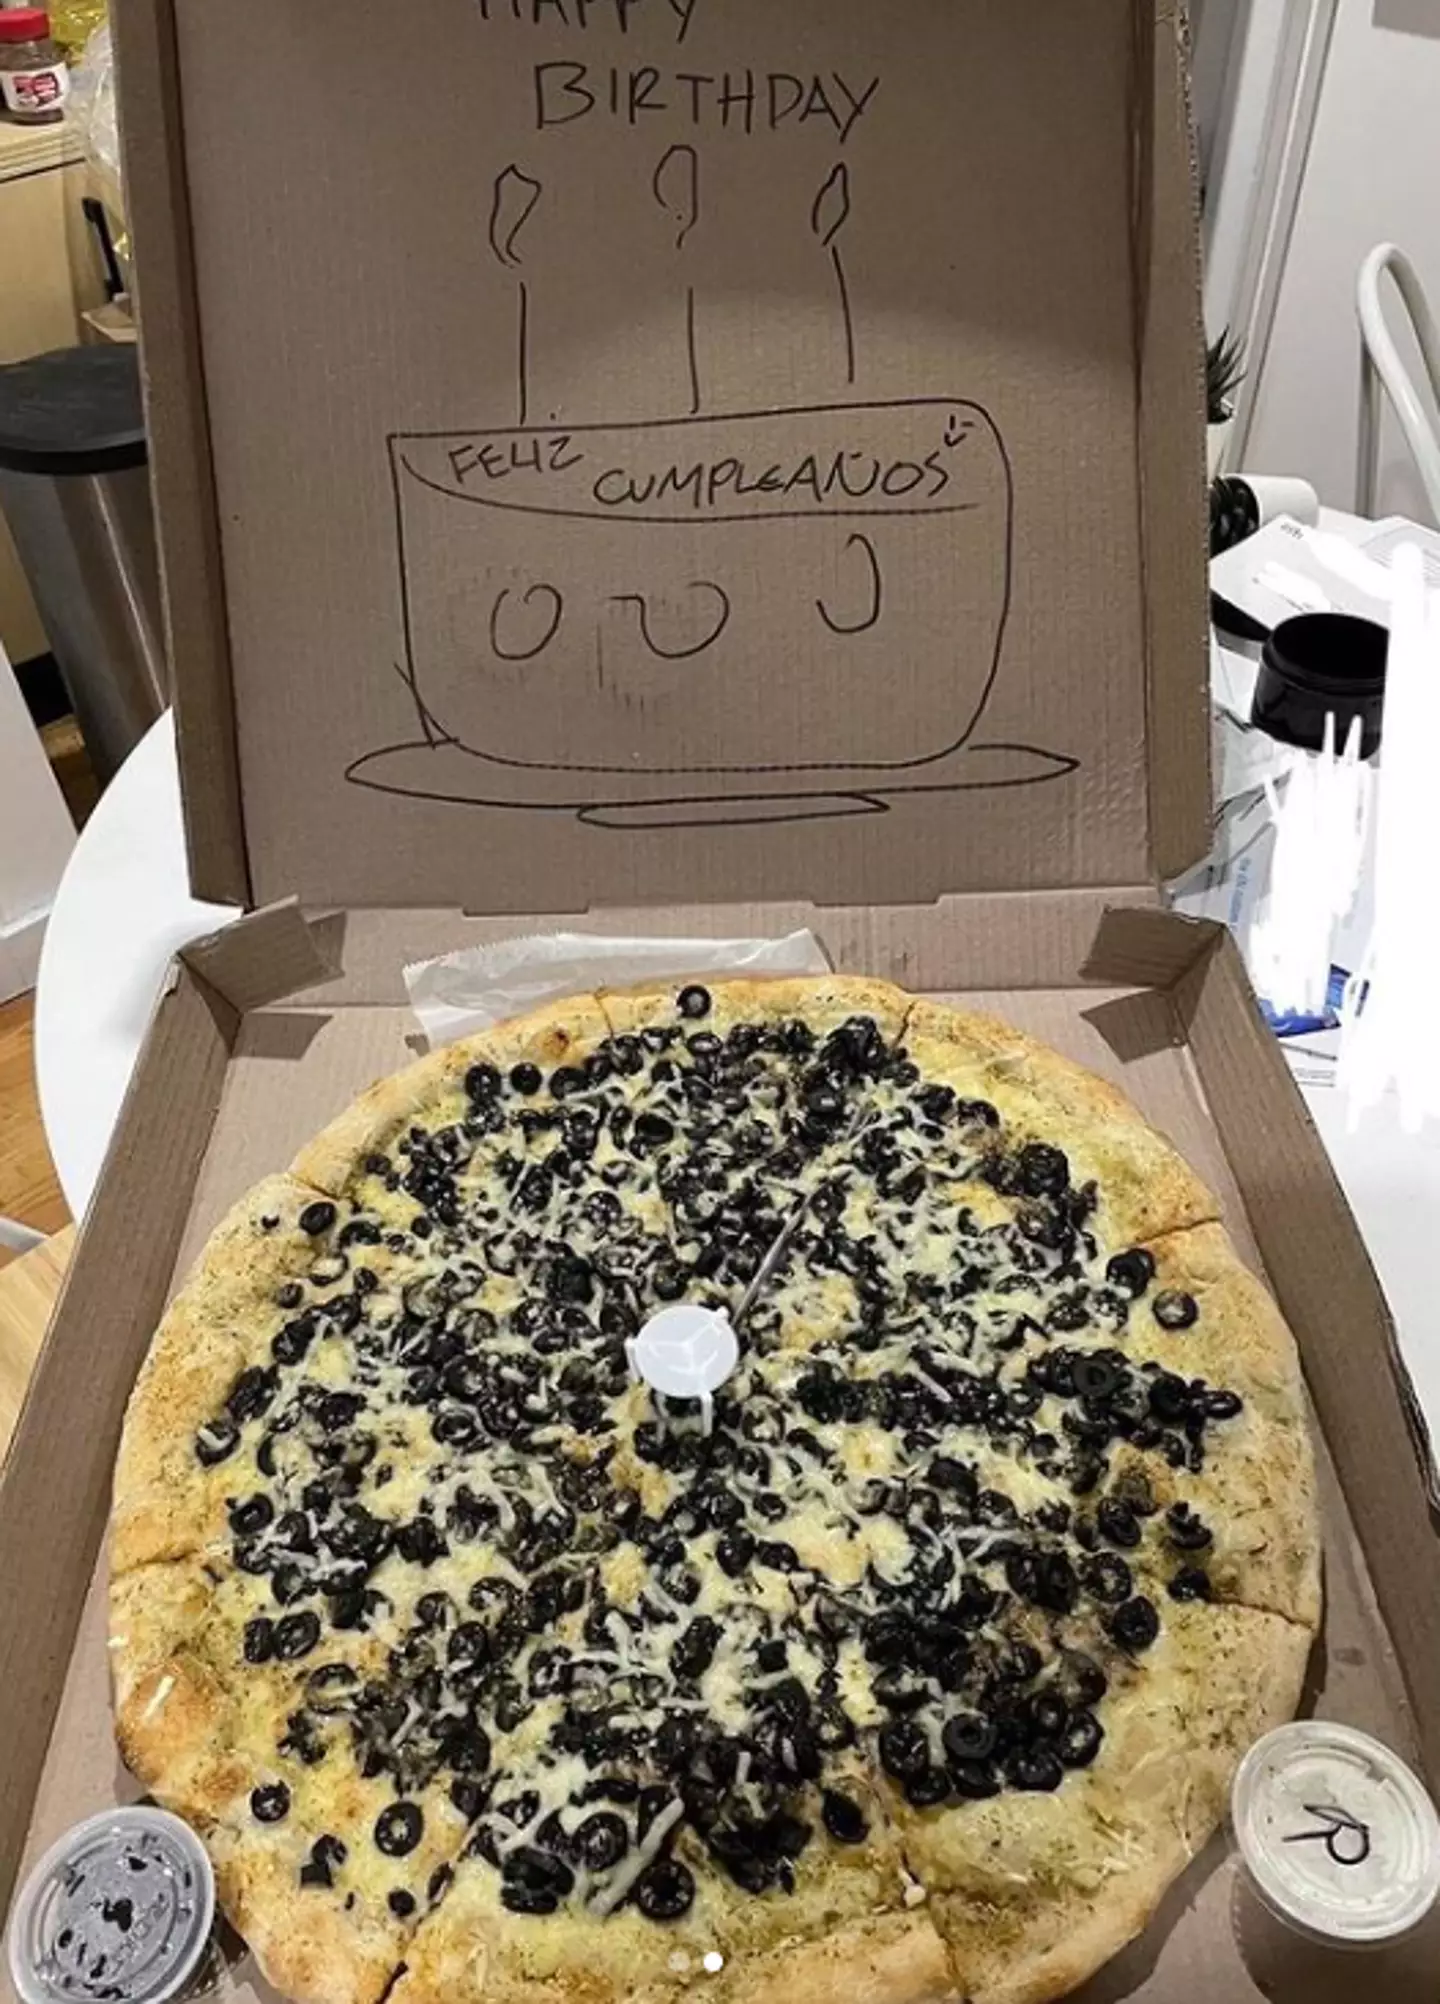 The pizza was topped with a crazy amount of olives.